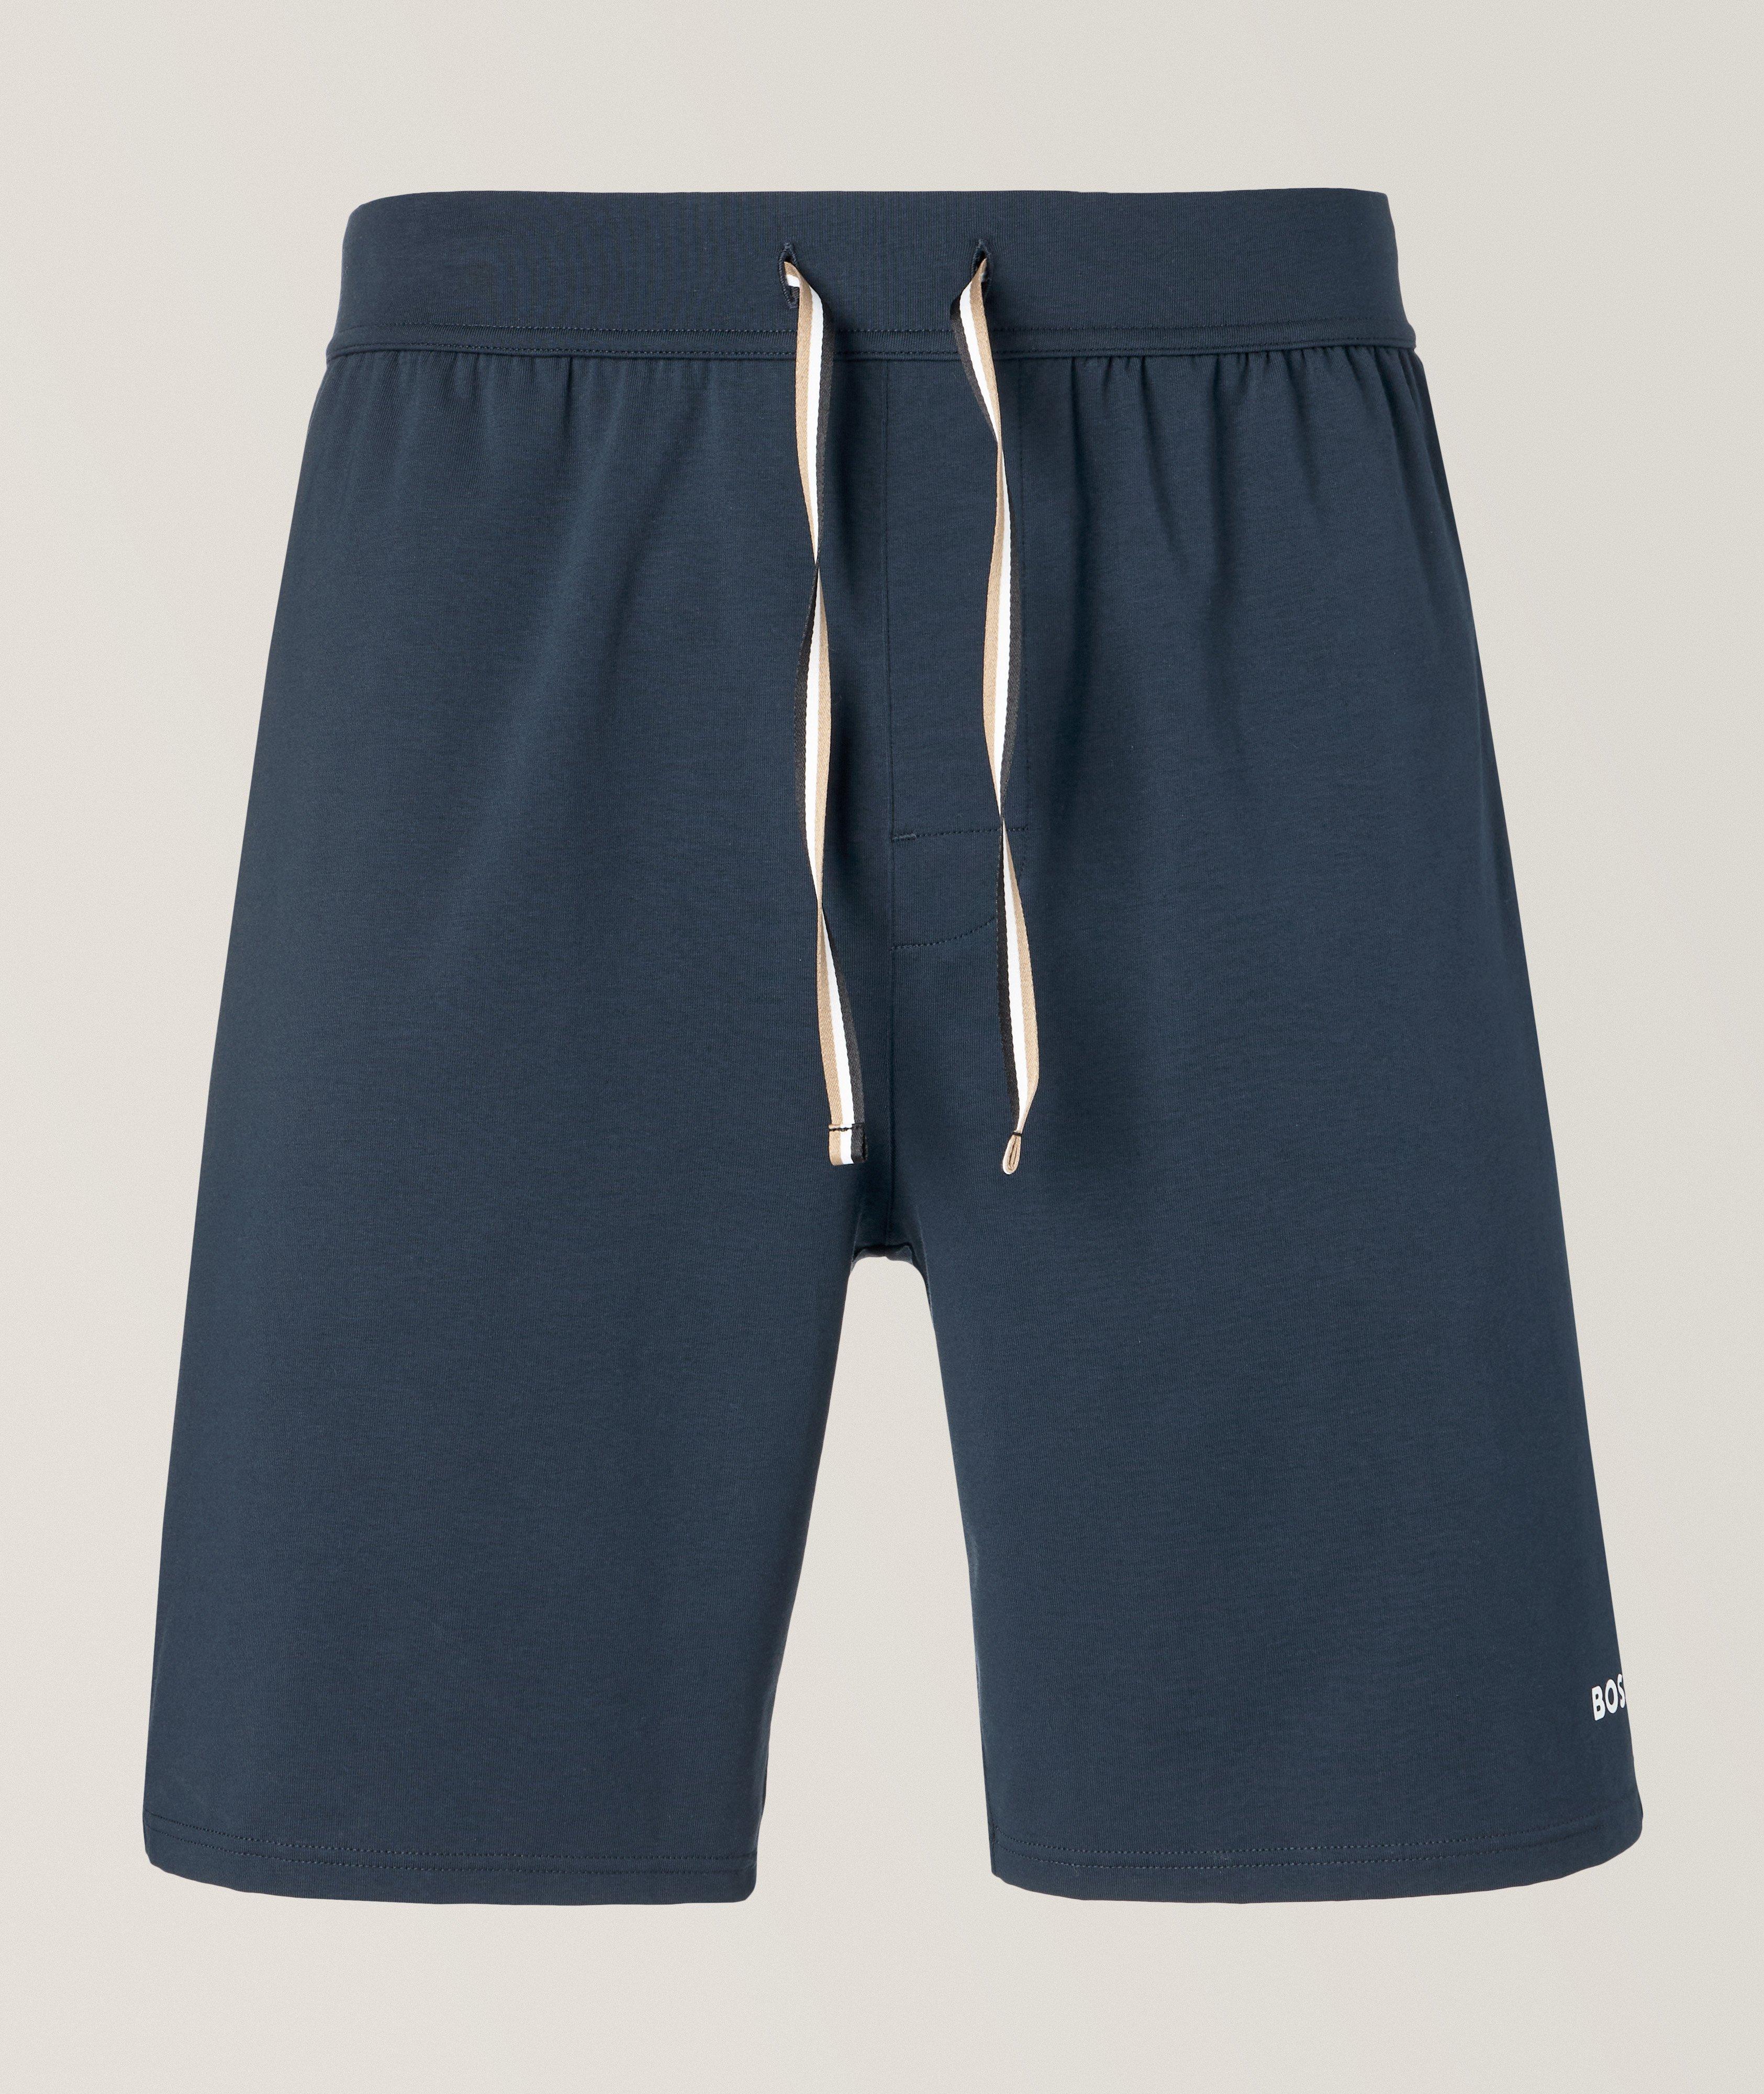 Homewear Collection Stretch-Cotton Sleep Shorts image 0